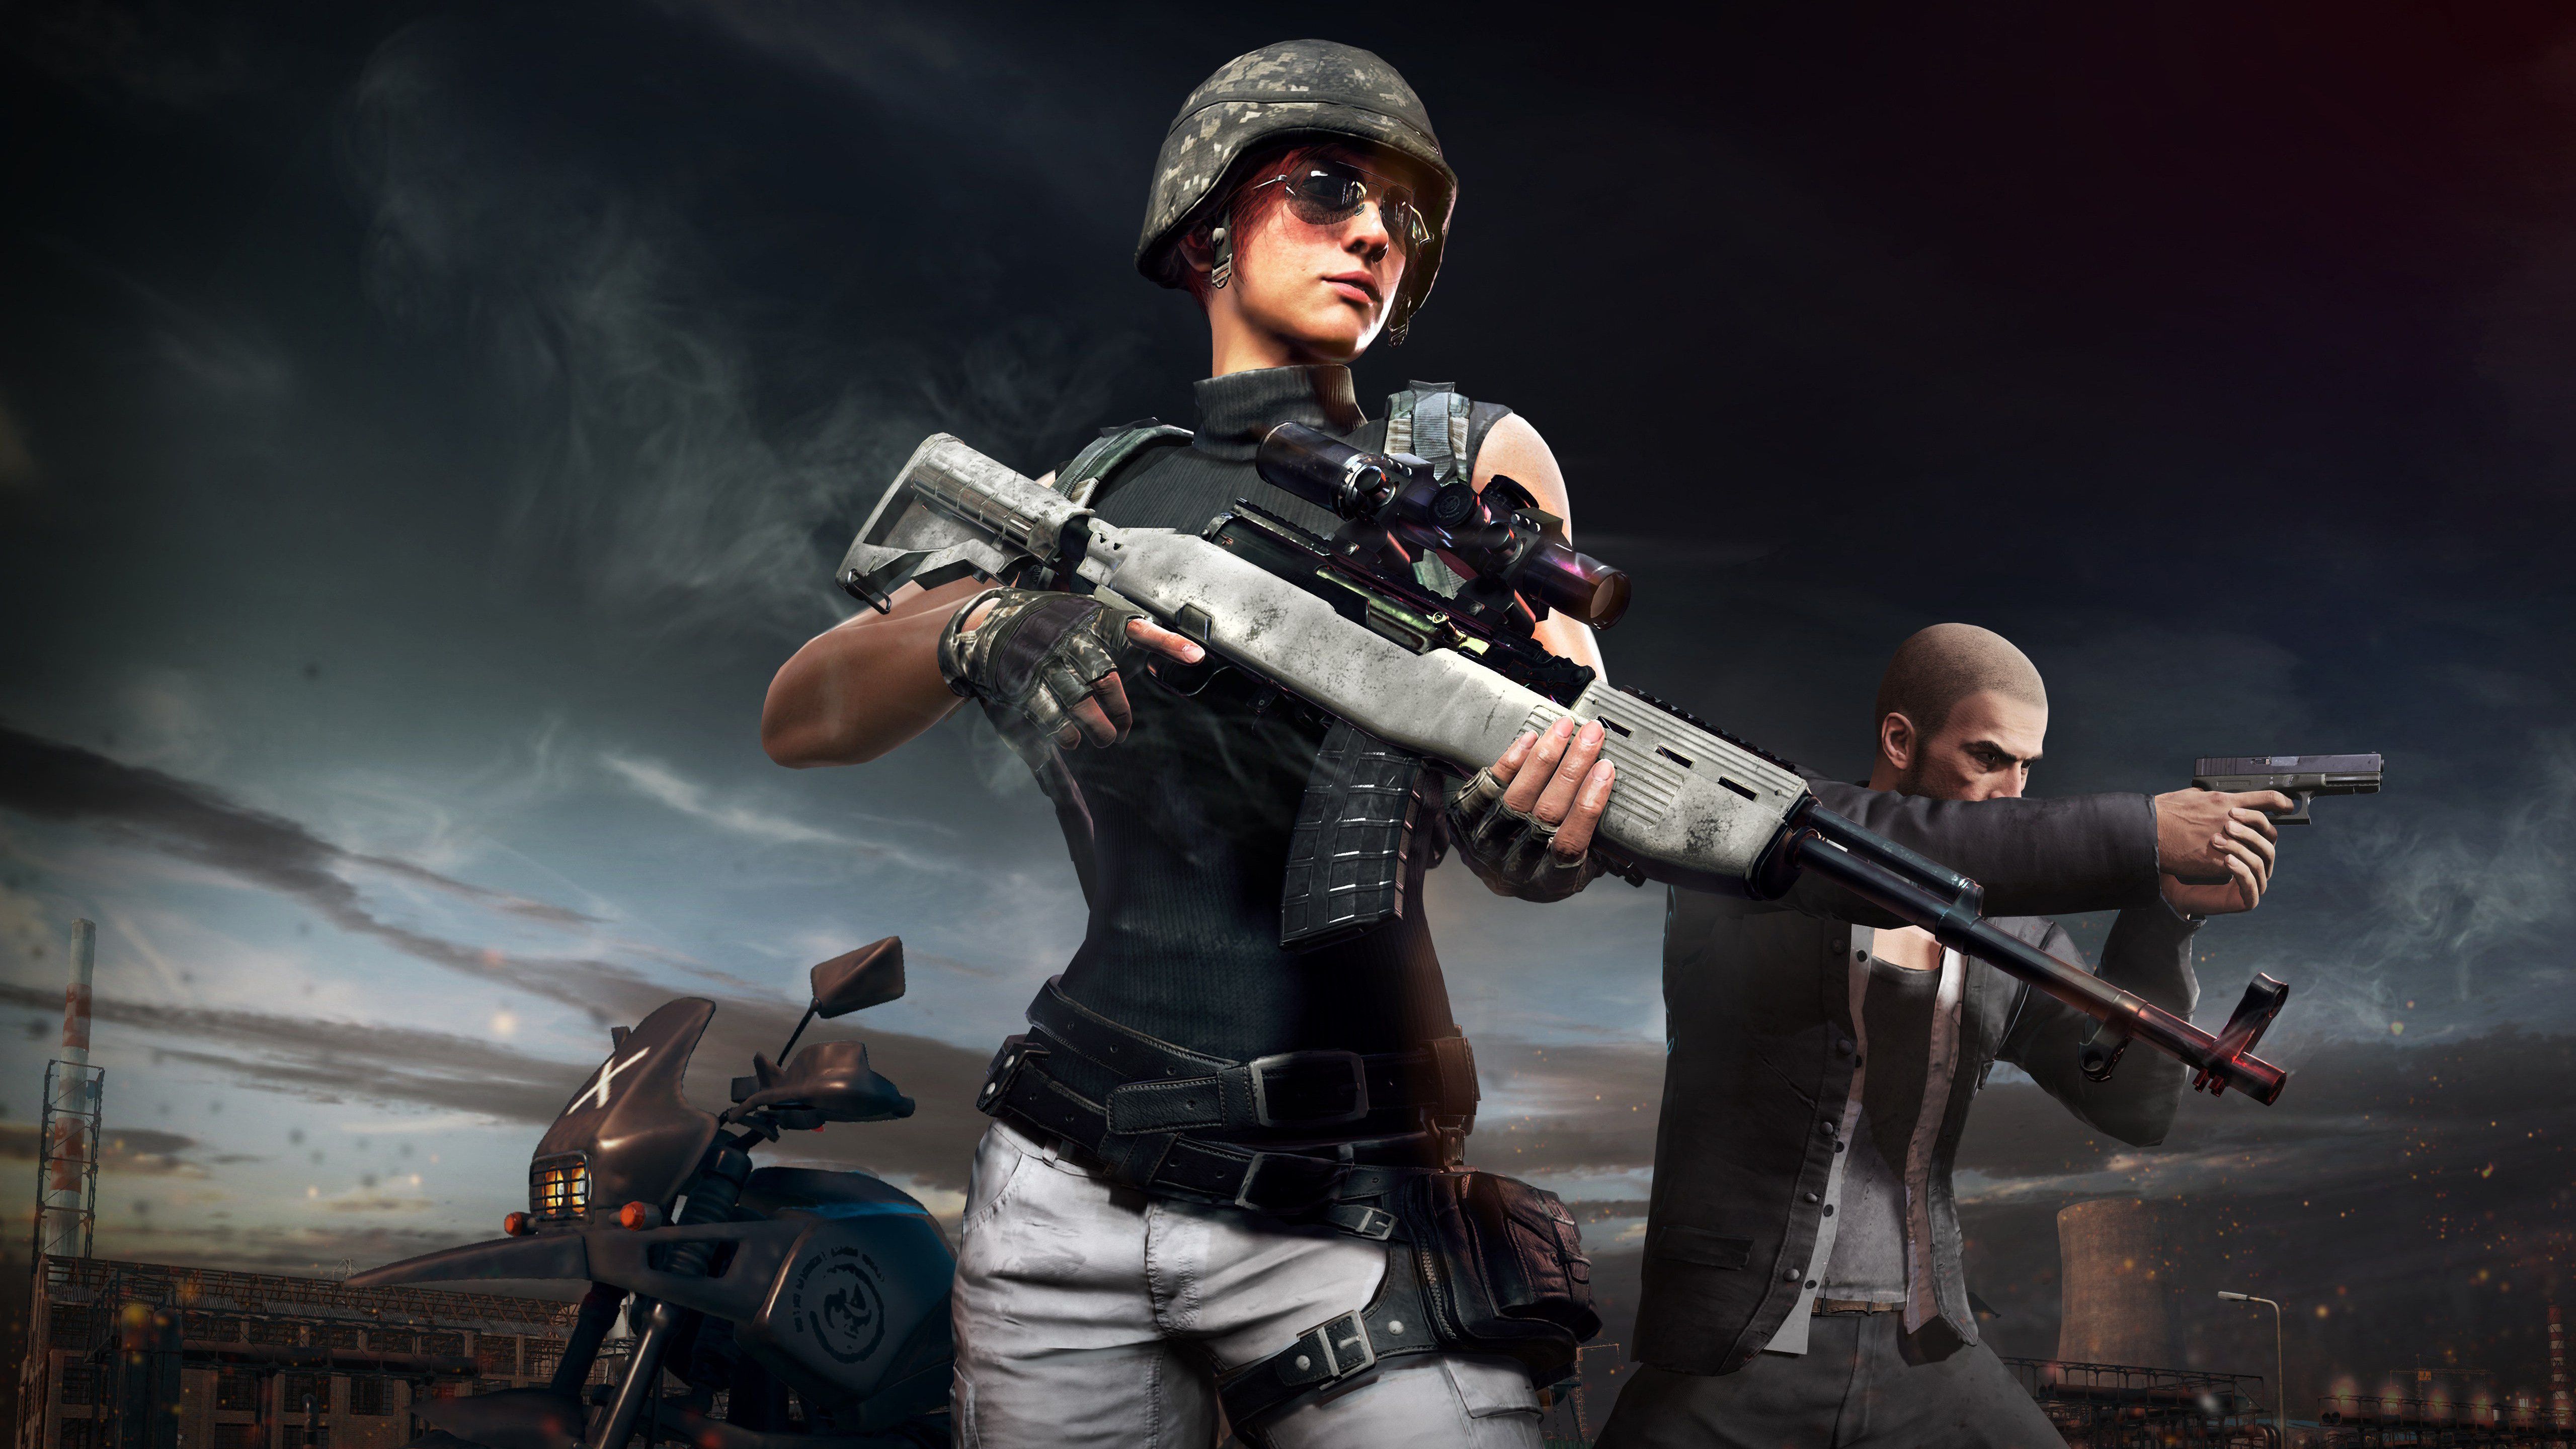 5K Wallpaper of Girl with Weapon Sniper in PUBG Game